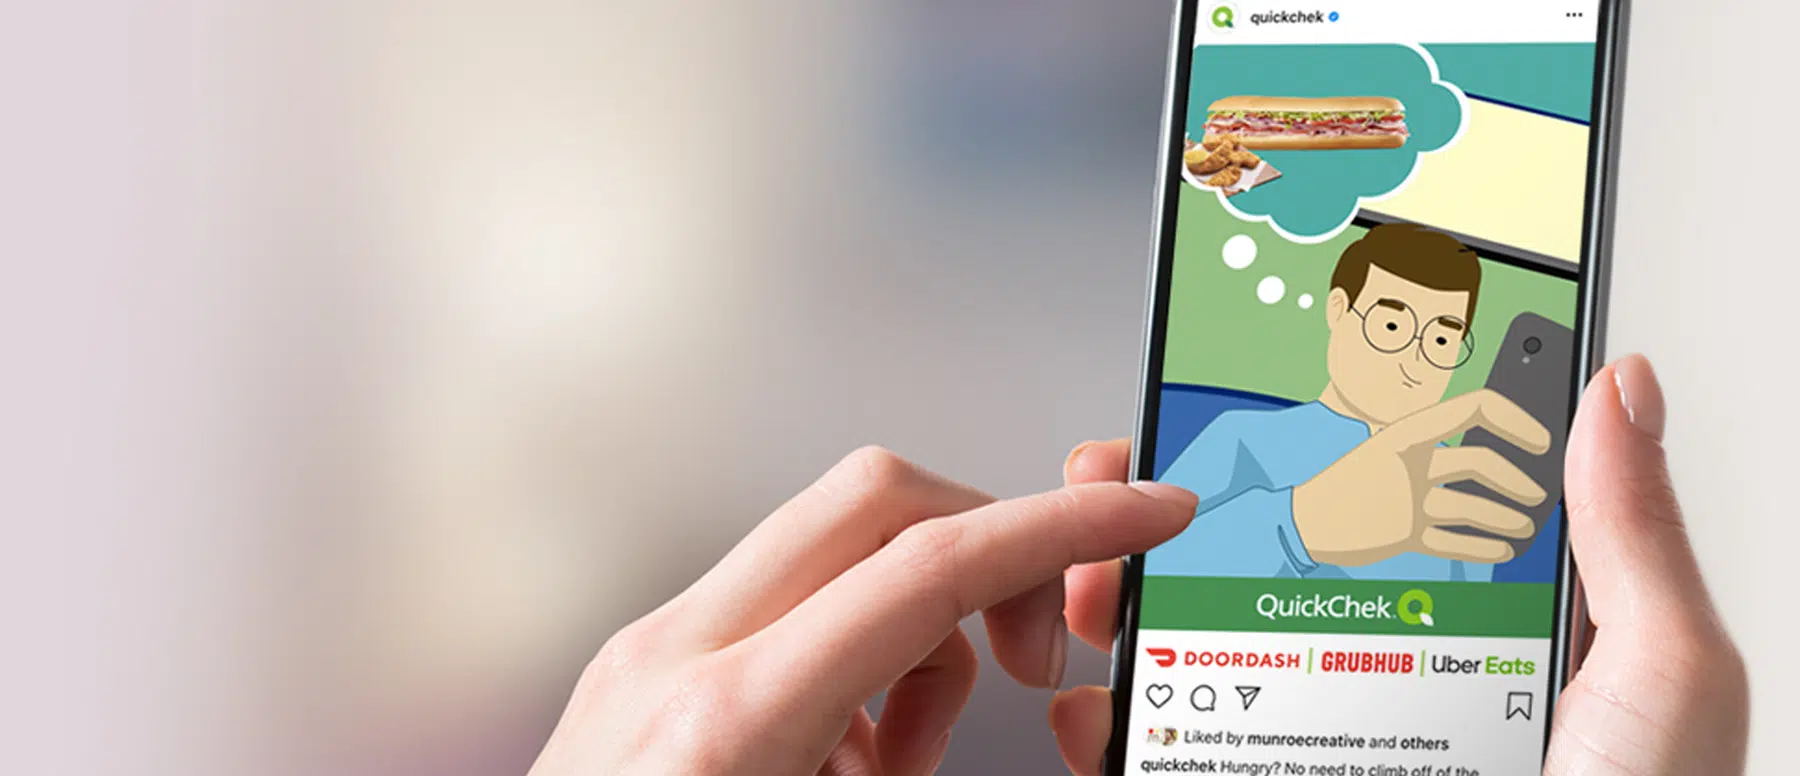 Digital Marketing Campaign for QuickChek Delivery